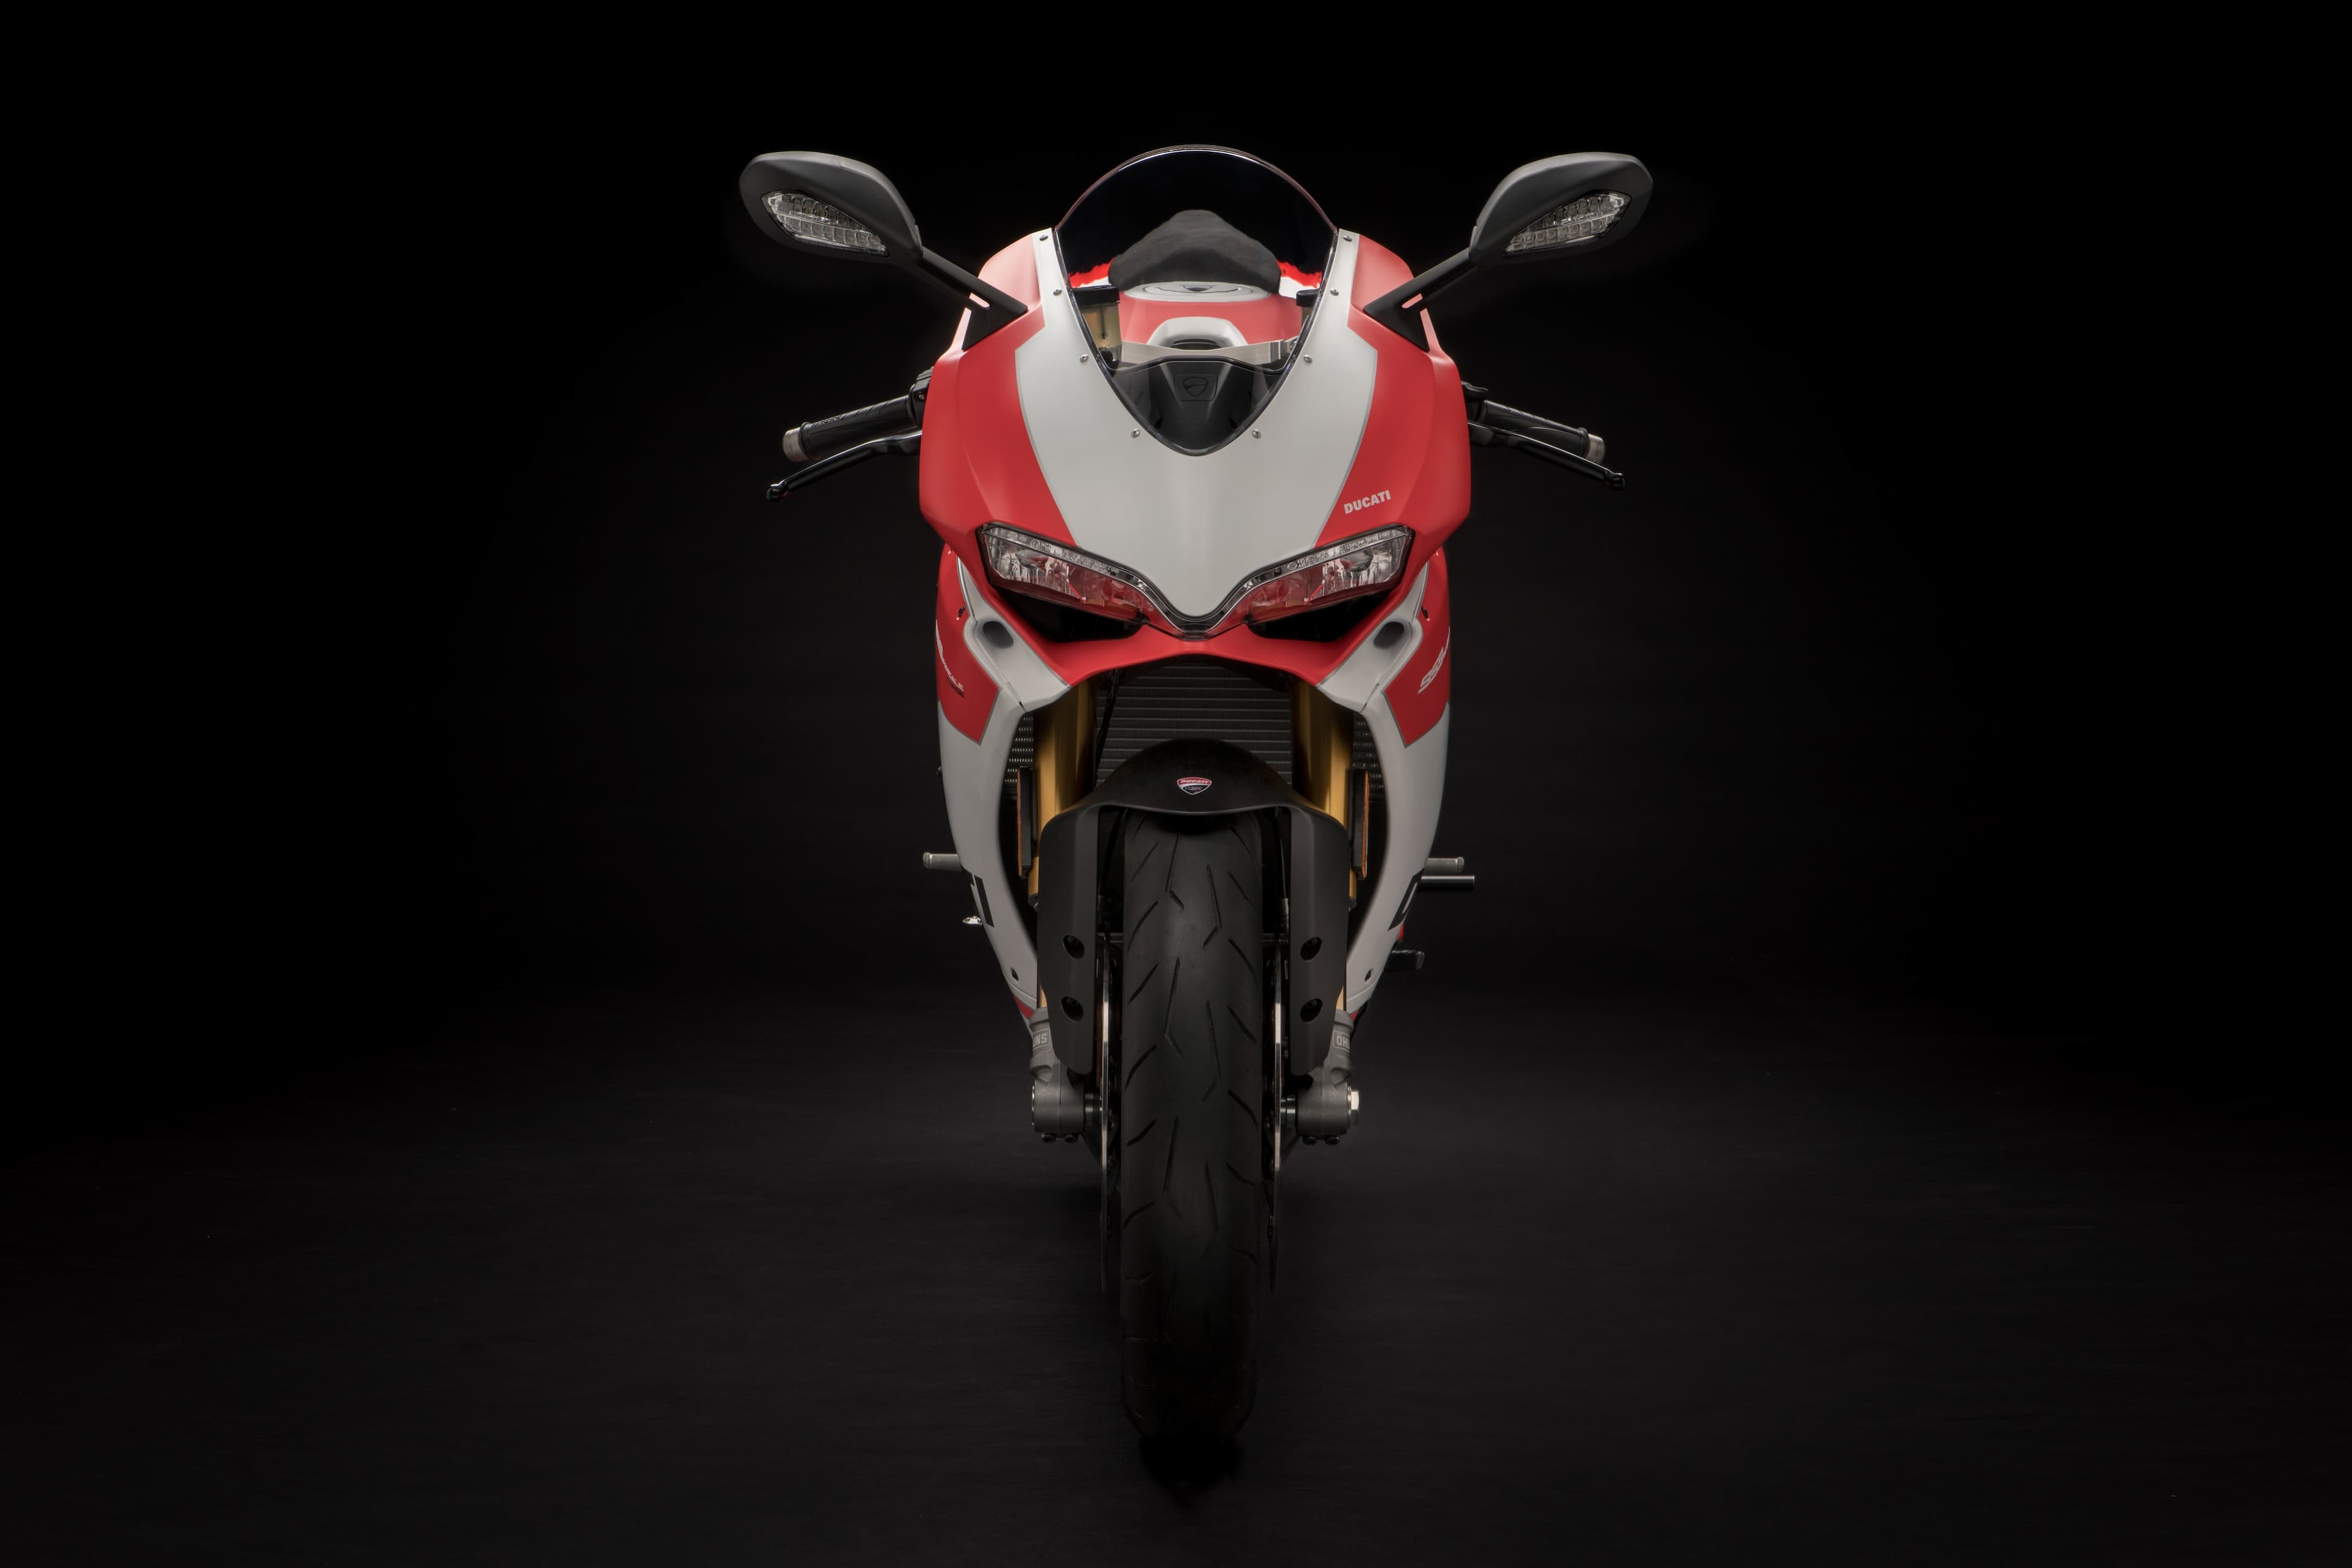 The Ducati Panigale 959 Corse Unveiled at EICMA